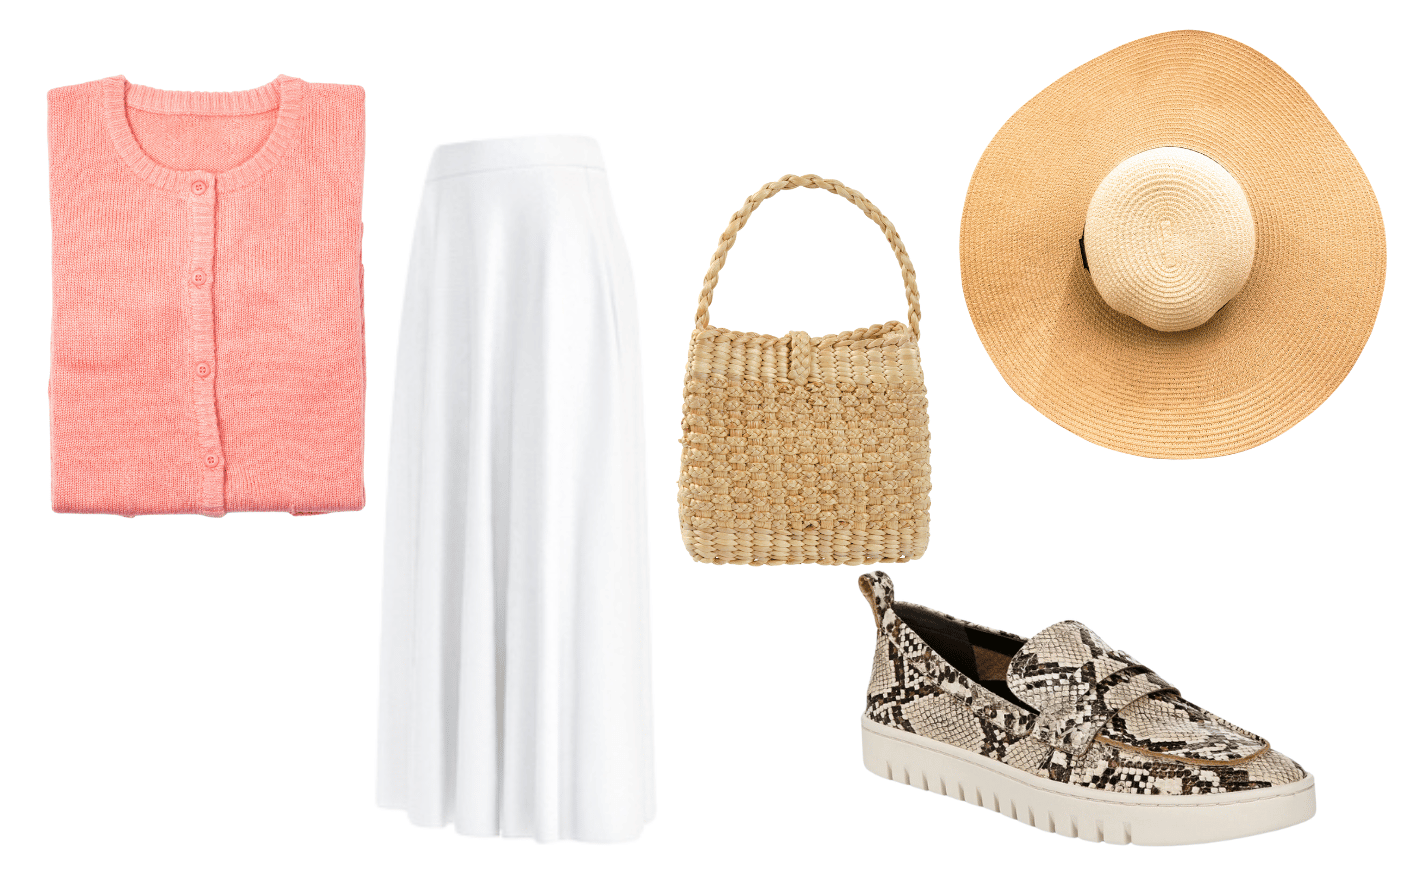 cardigan sweater straw hat and bag and loafer